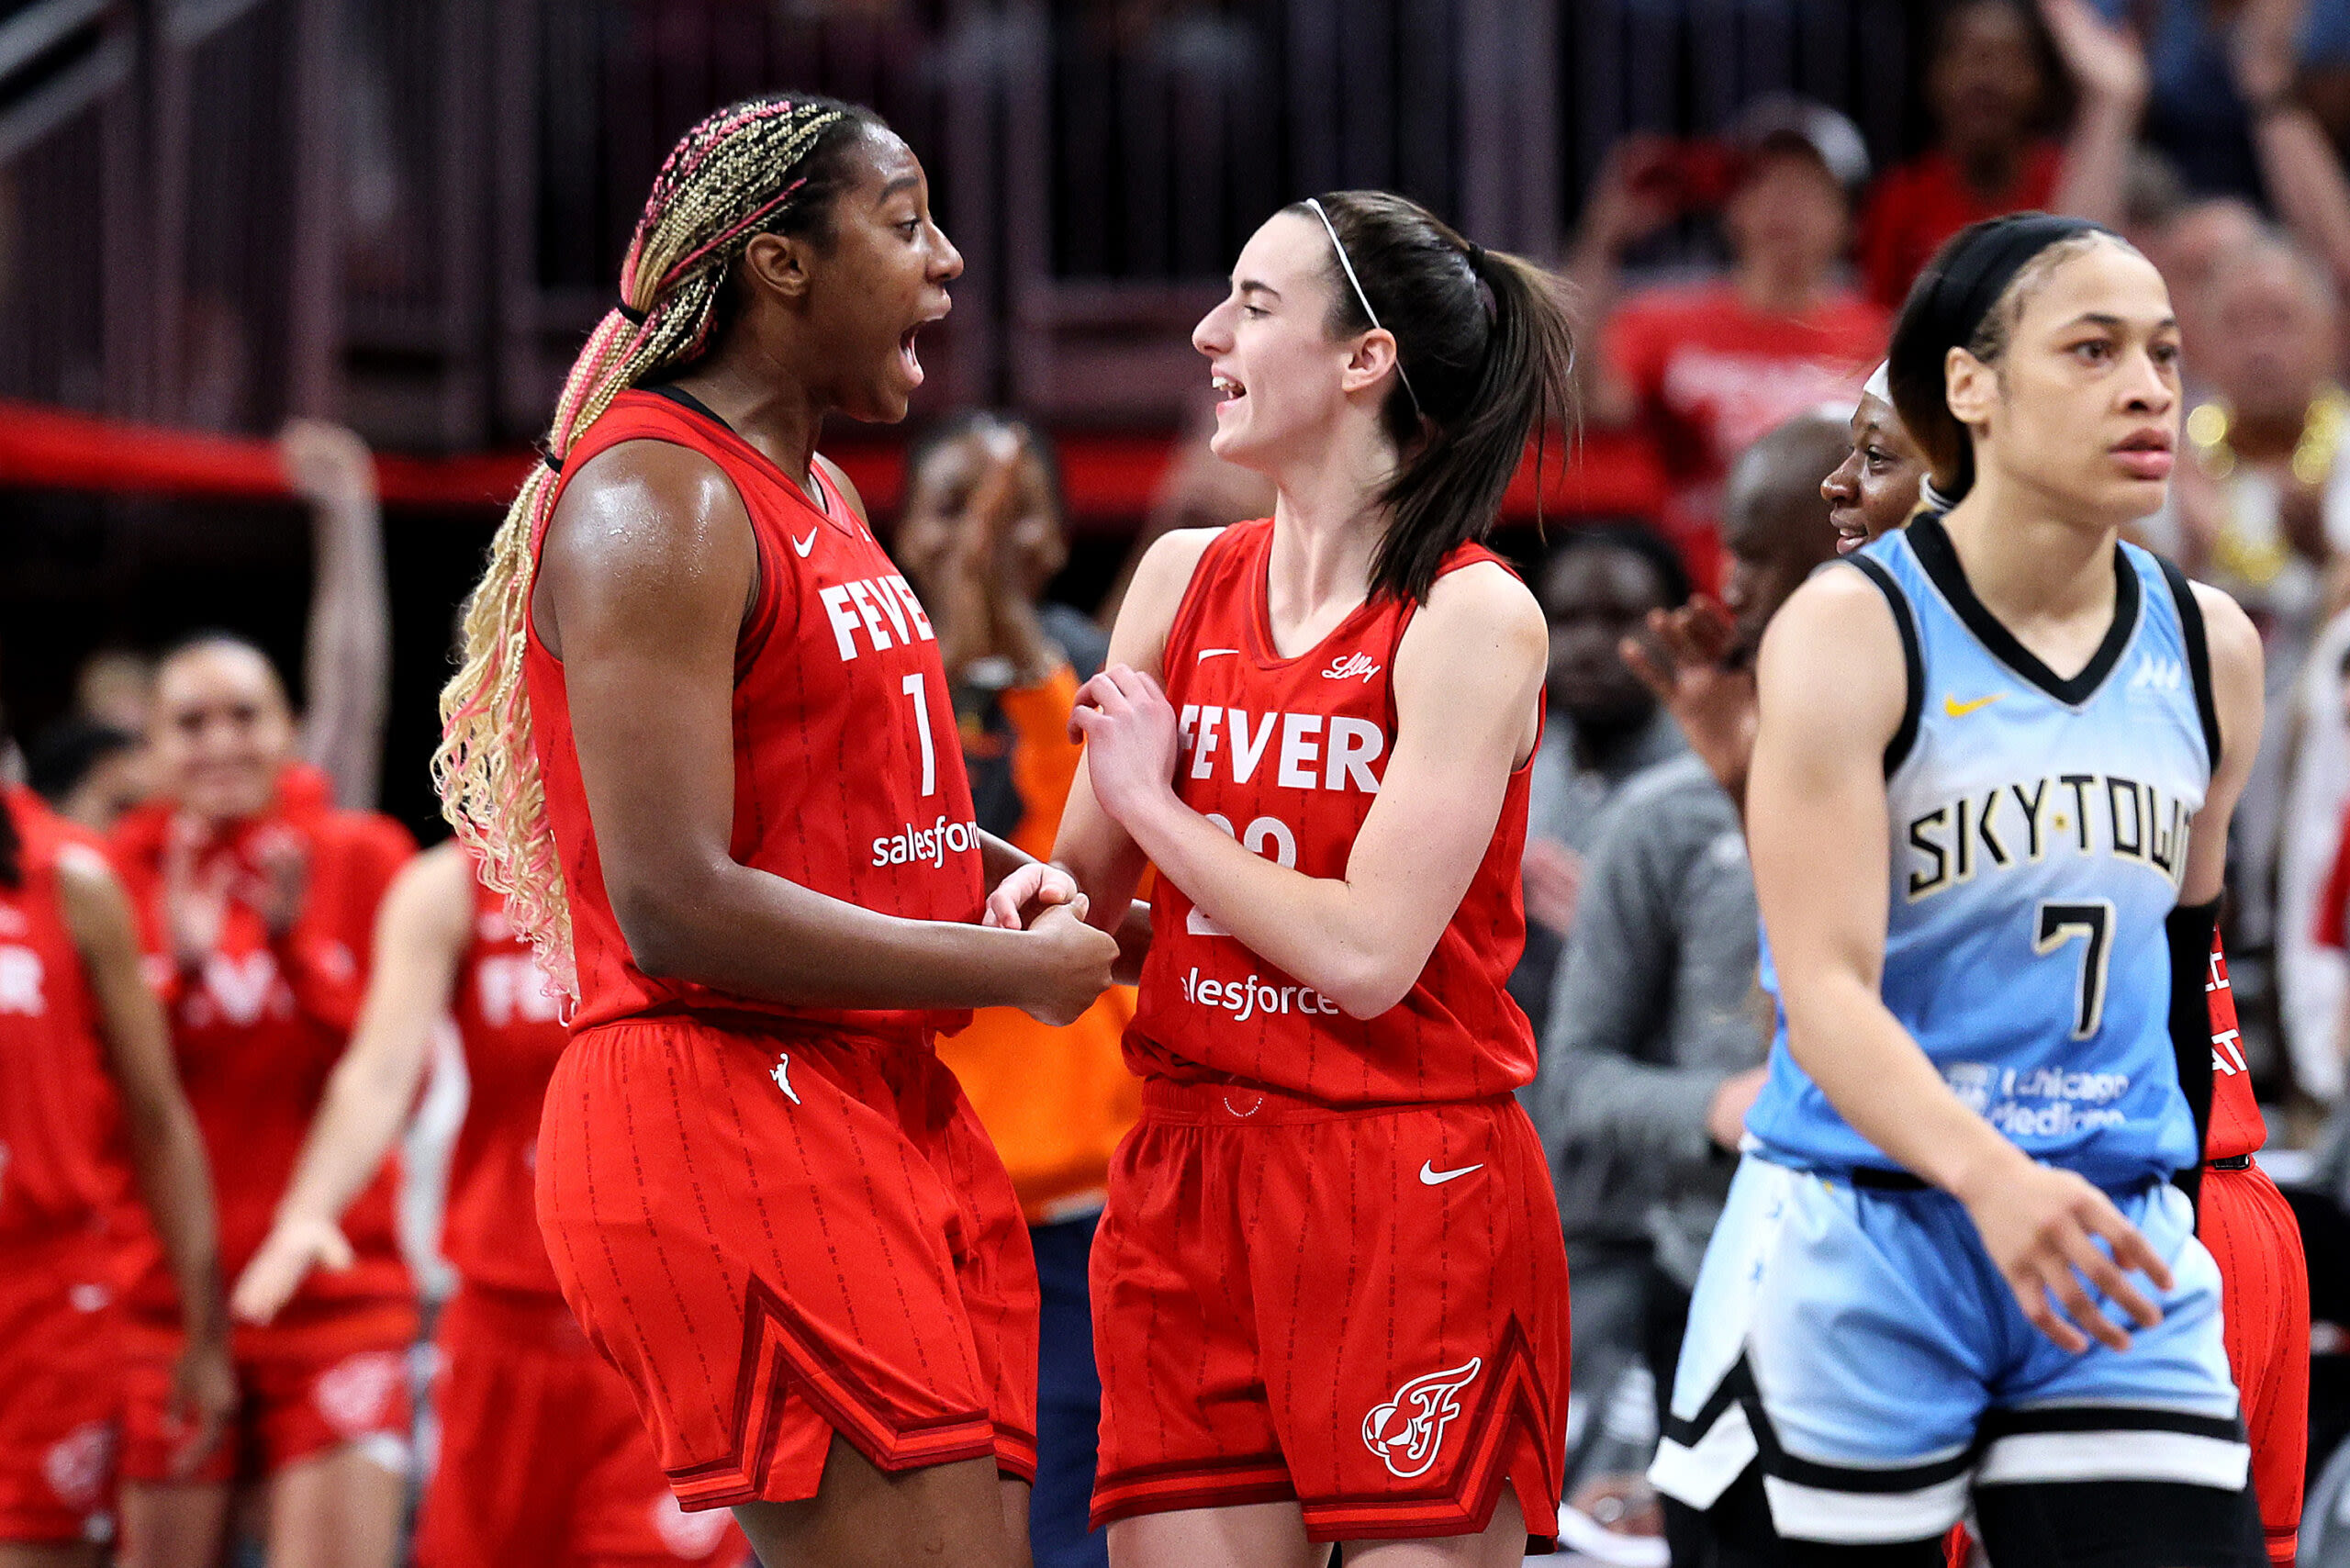 Chennedy Carter comments on Caitlin Clark Flagrant 1 foul, chalks it up to competition